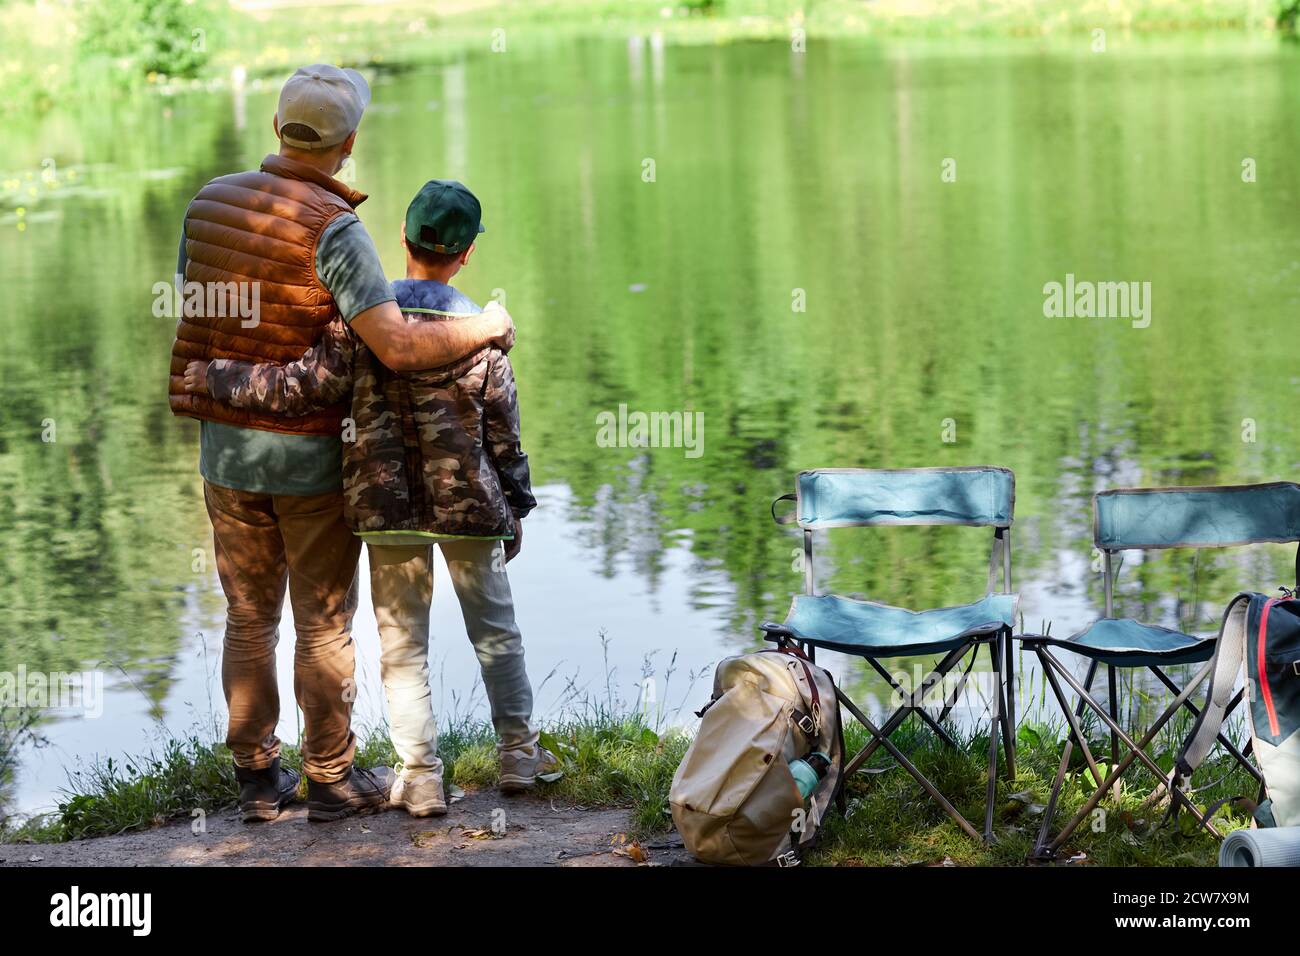 Full length back view portrait of father and son standing by lake and enjoying nature during hiking or fishing trip, copy space Stock Photo